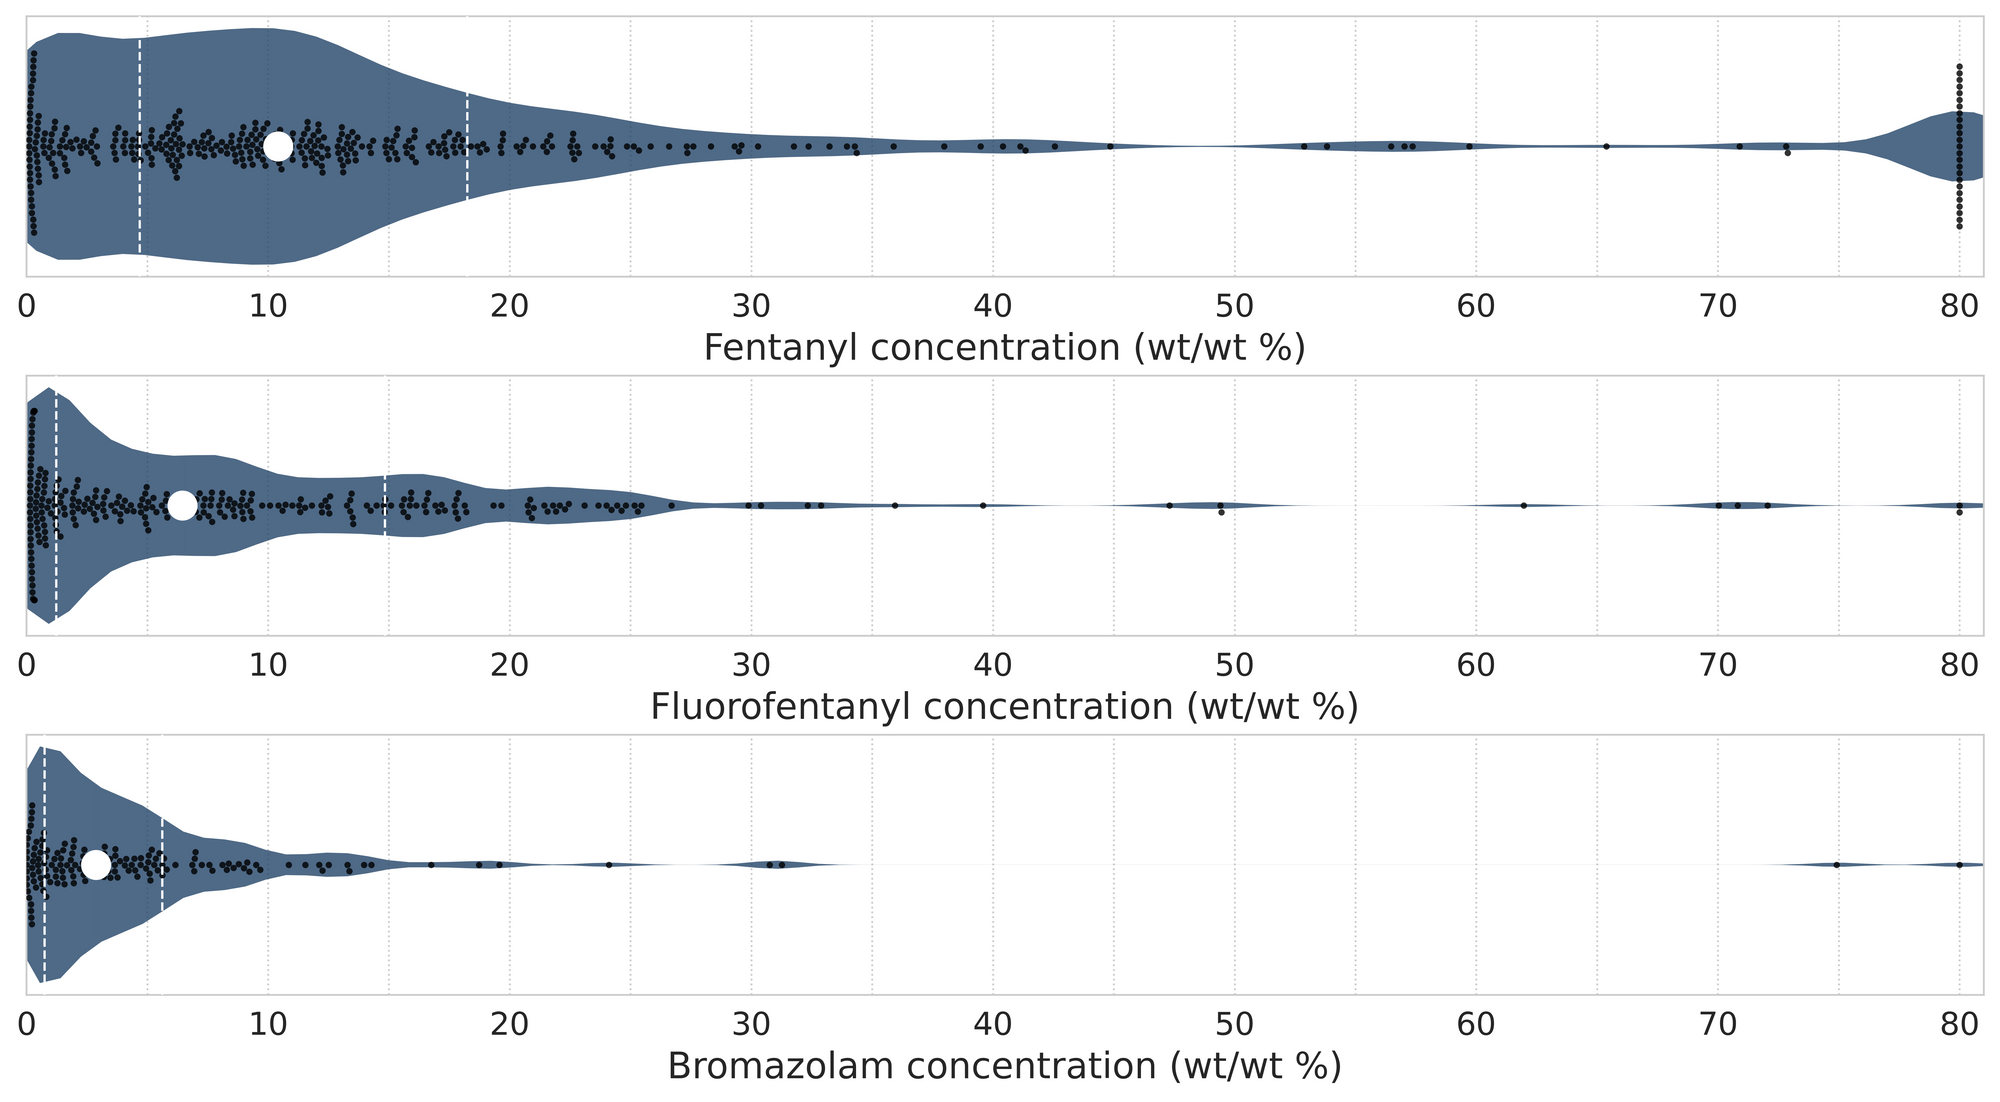 Figure 4. Violin plots of fentanyl (top panel), fluorofentanyl, (middle panel), and bromazolam (bottom) positive samples quantified during April across all collection locations/methods. *These concentrations reflect the upper limits of the PS-MS calibration.